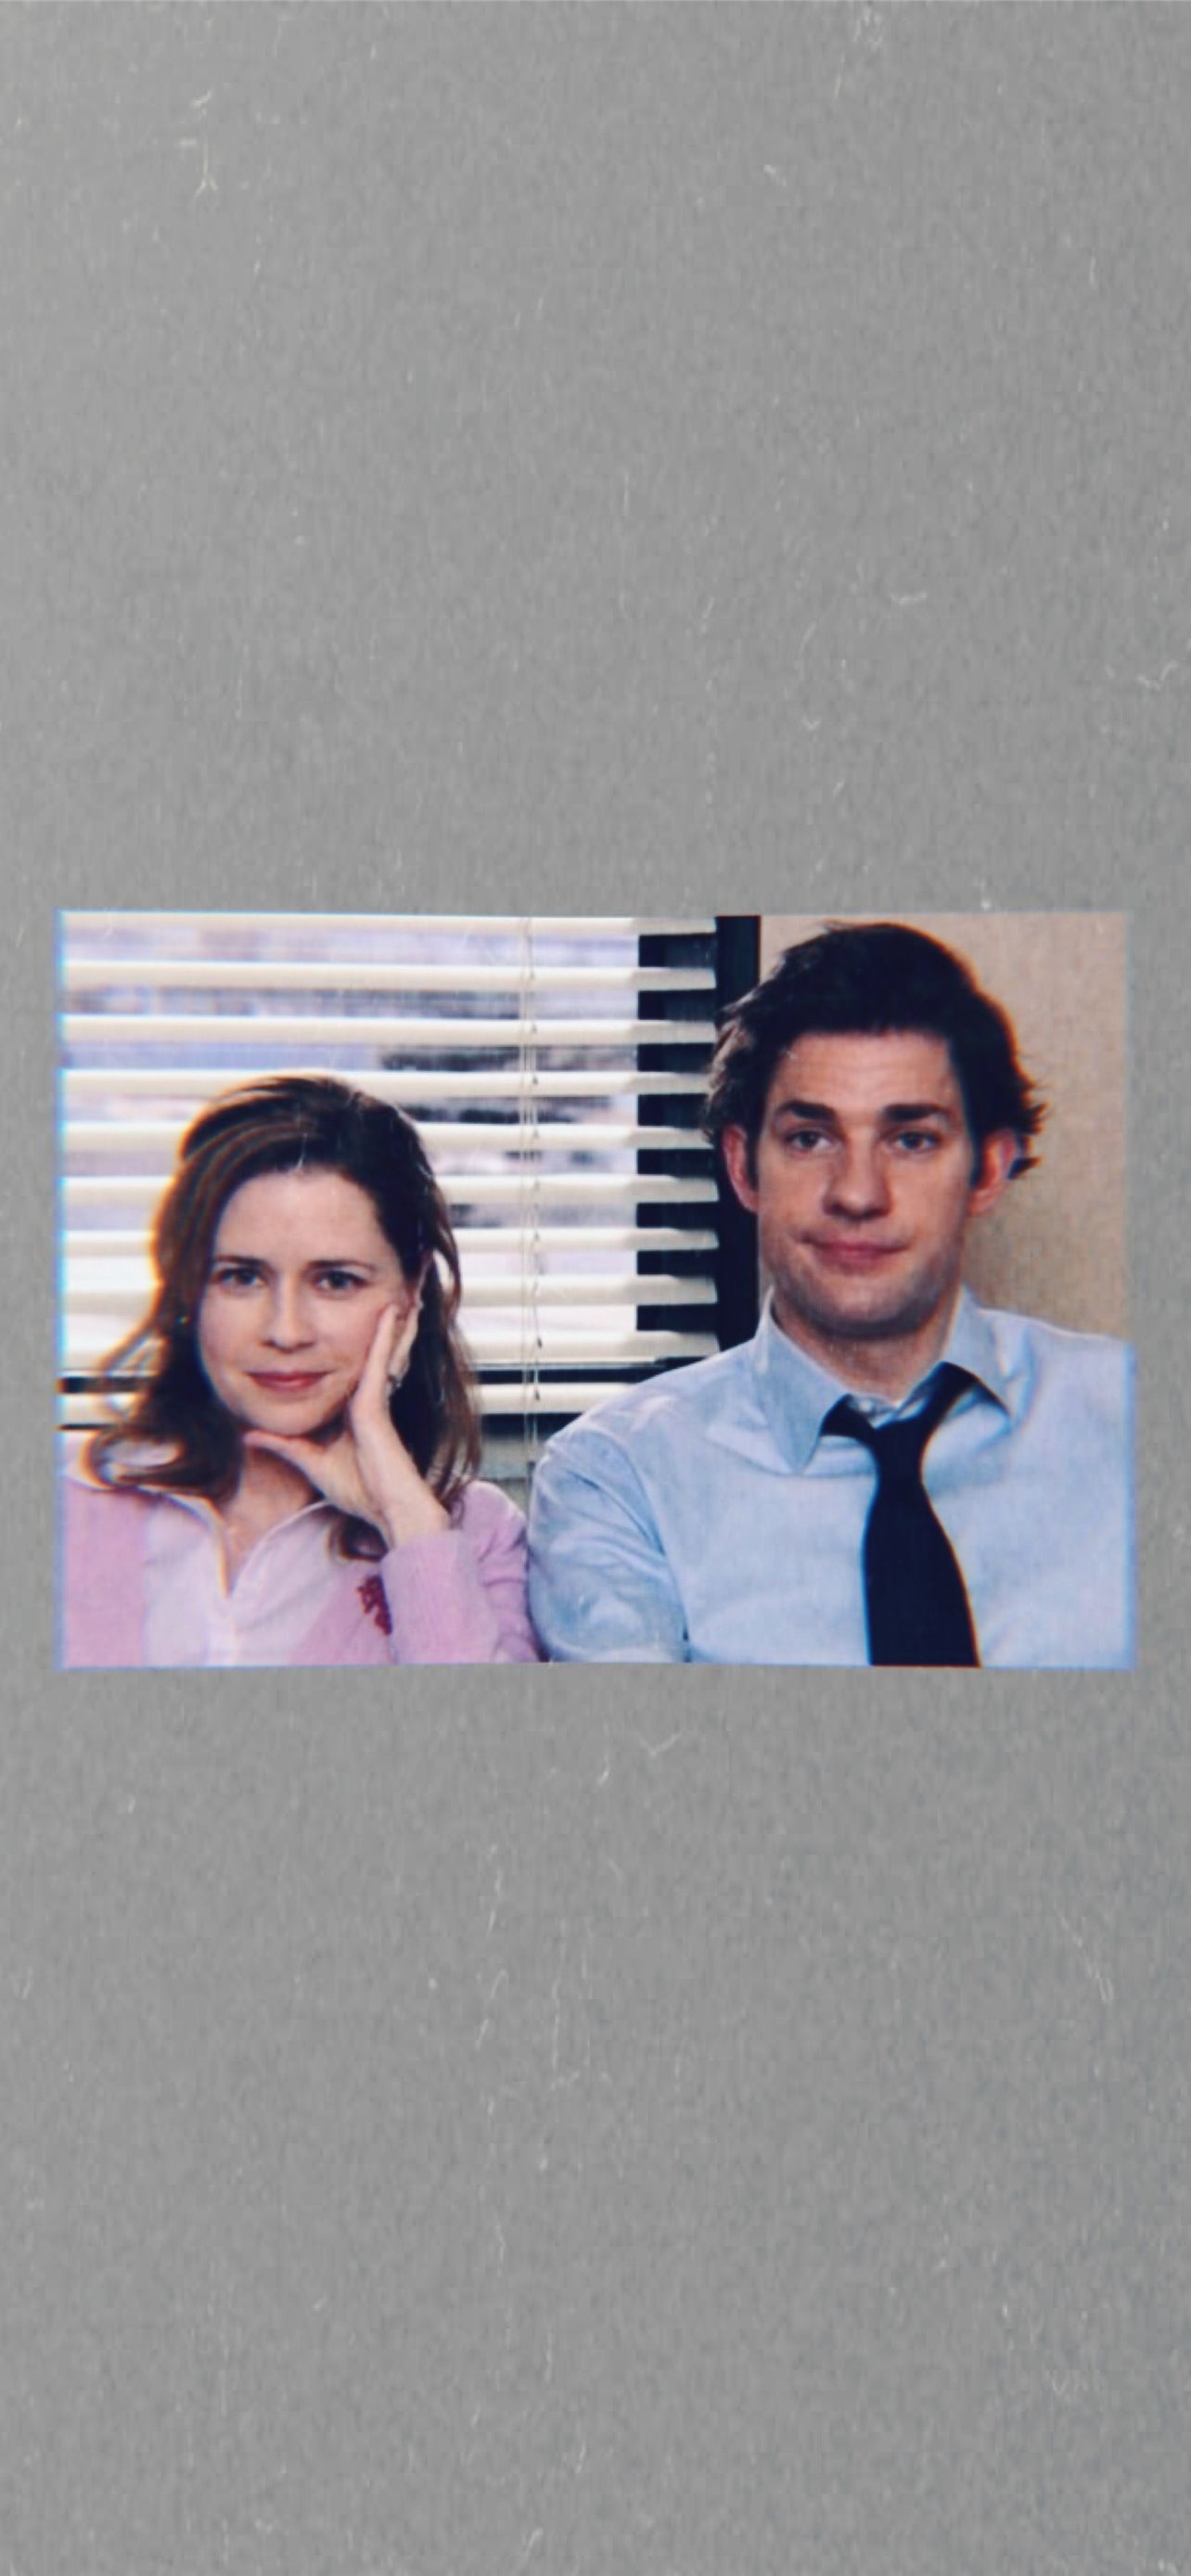 The Office Aesthetic Top Free The Office Aesthetic... iPhone wallpaper 